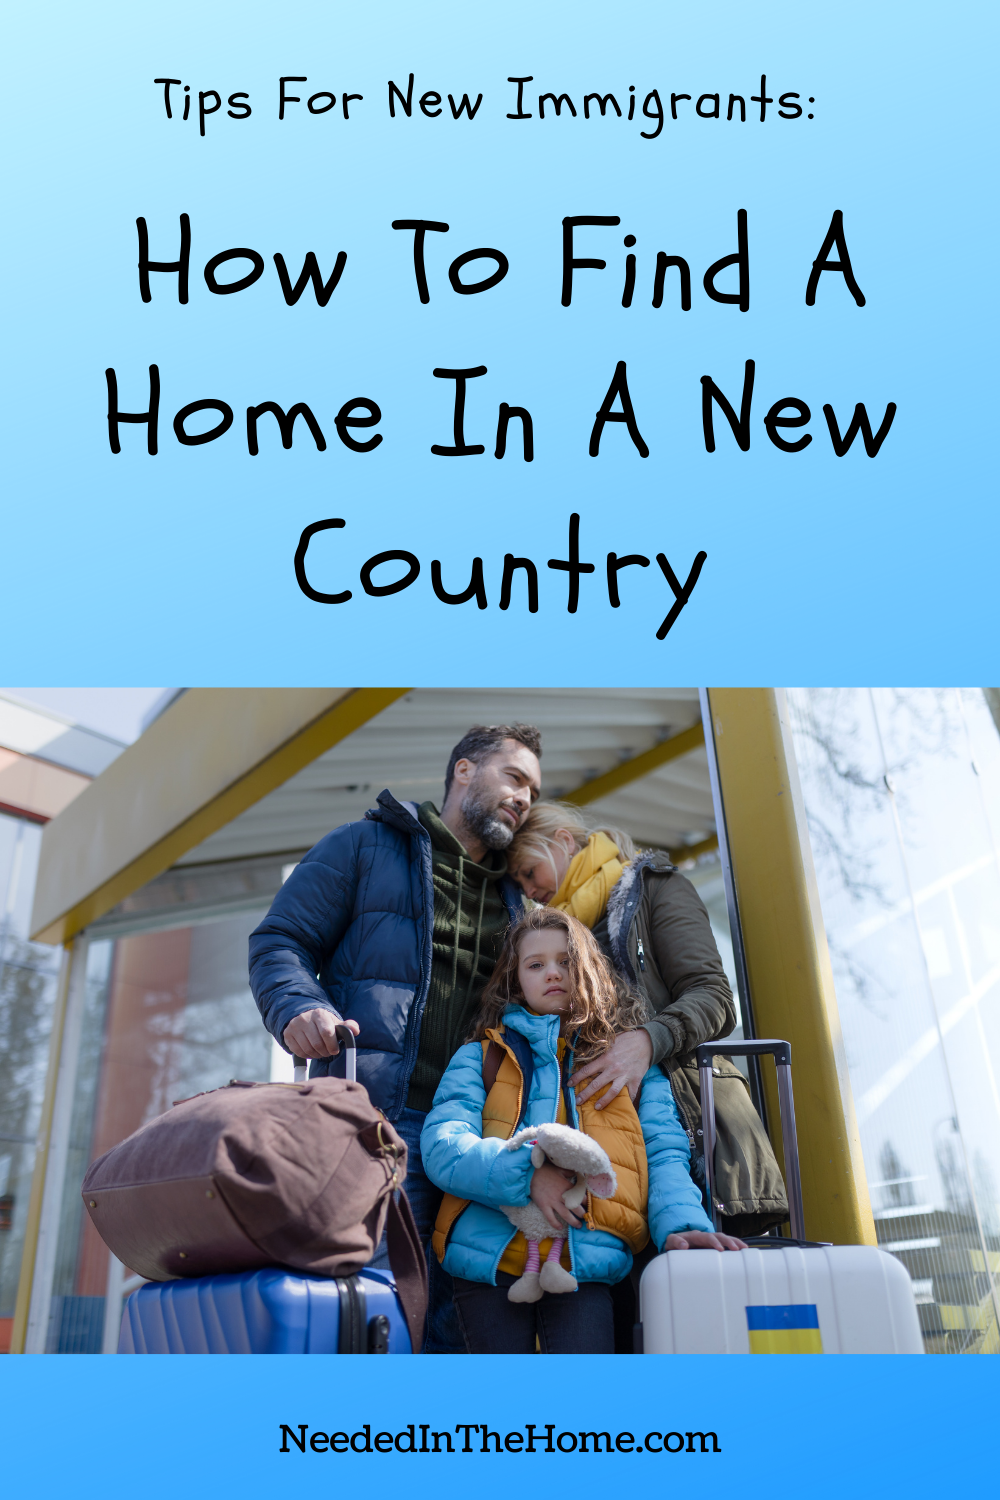 pinterest-pin-description tips for new immigrants how to find a home in a new country ukrainian family with luggage neededinthehome